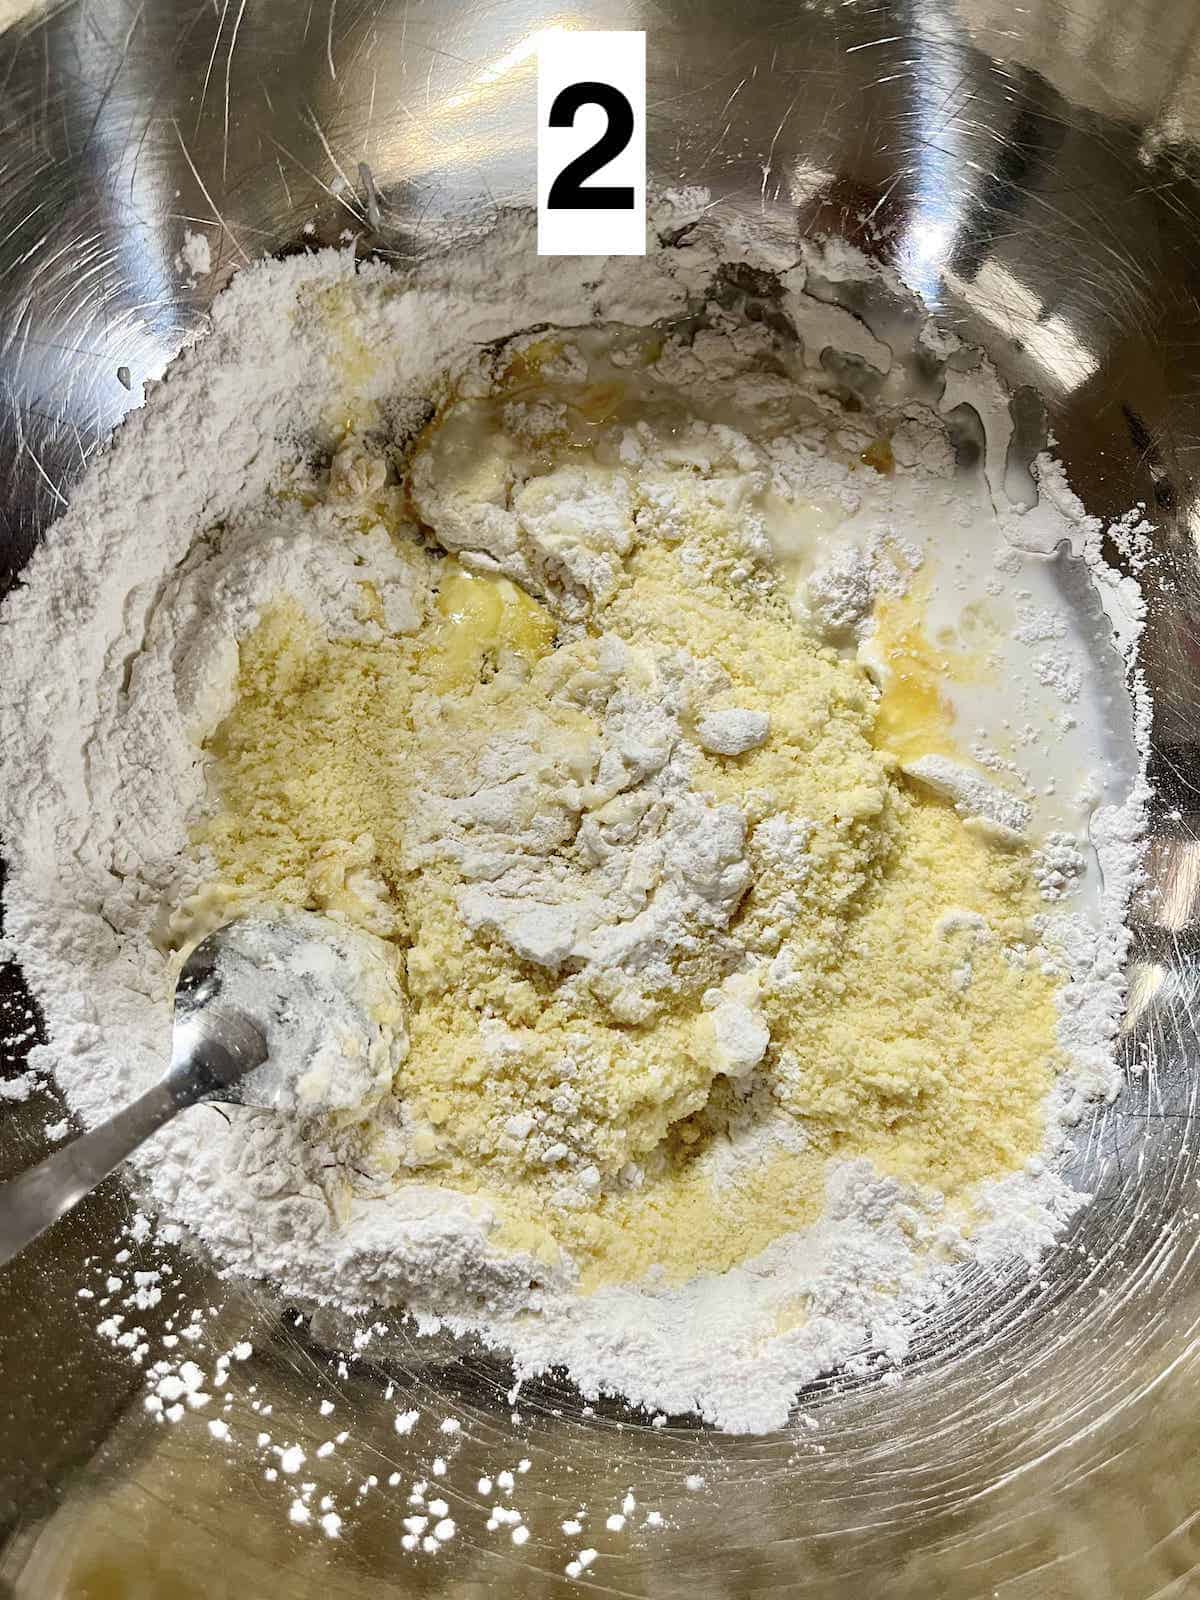 Mixing dry and wet ingredients for a mochi batter.